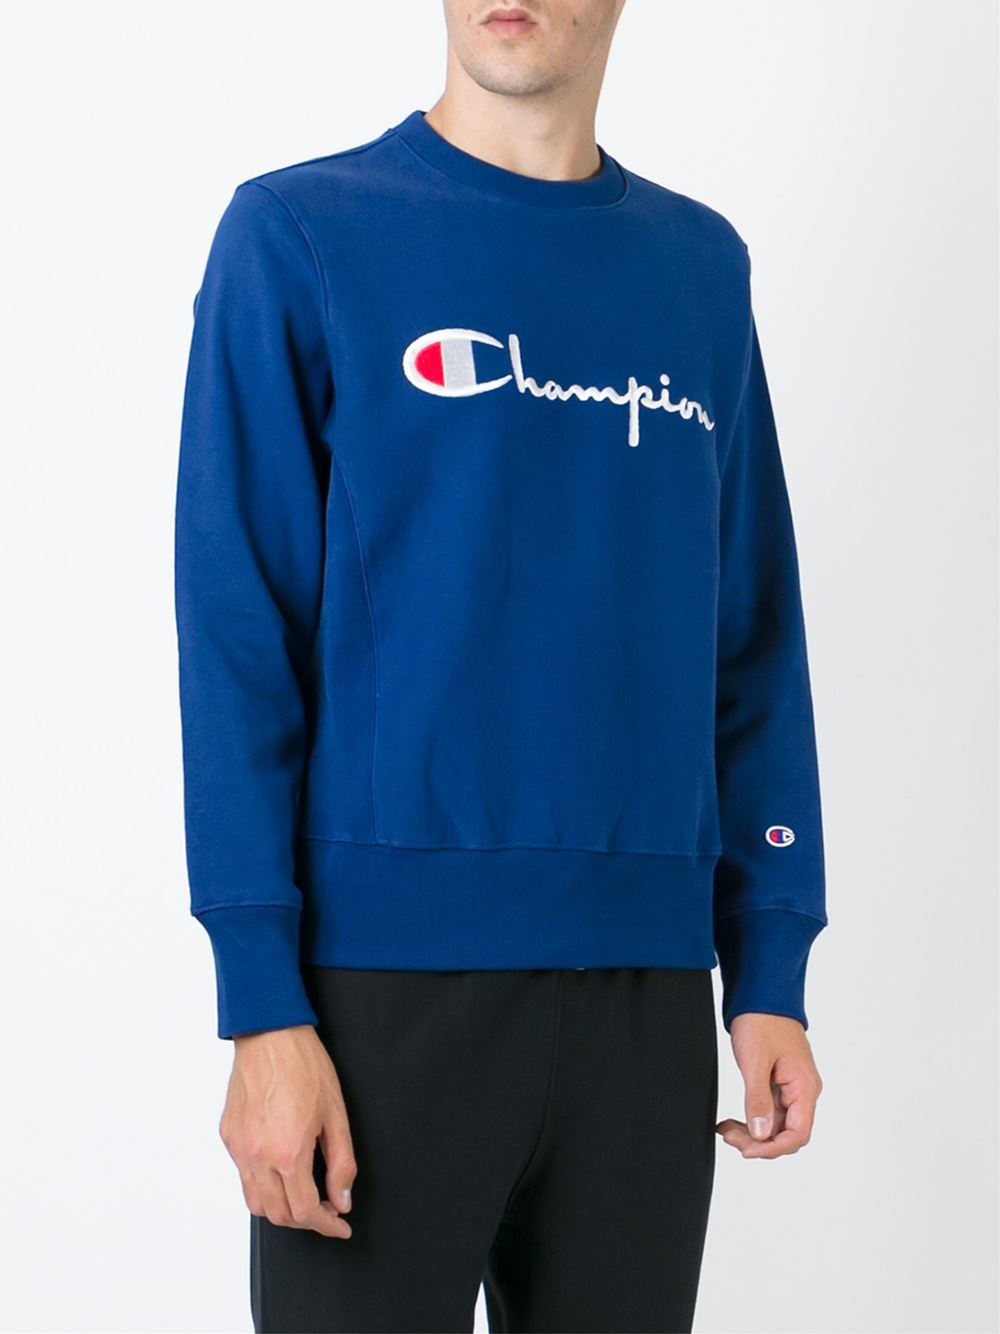 Lyst - Champion Logo Embroidered Sweatshirt in Blue for Men